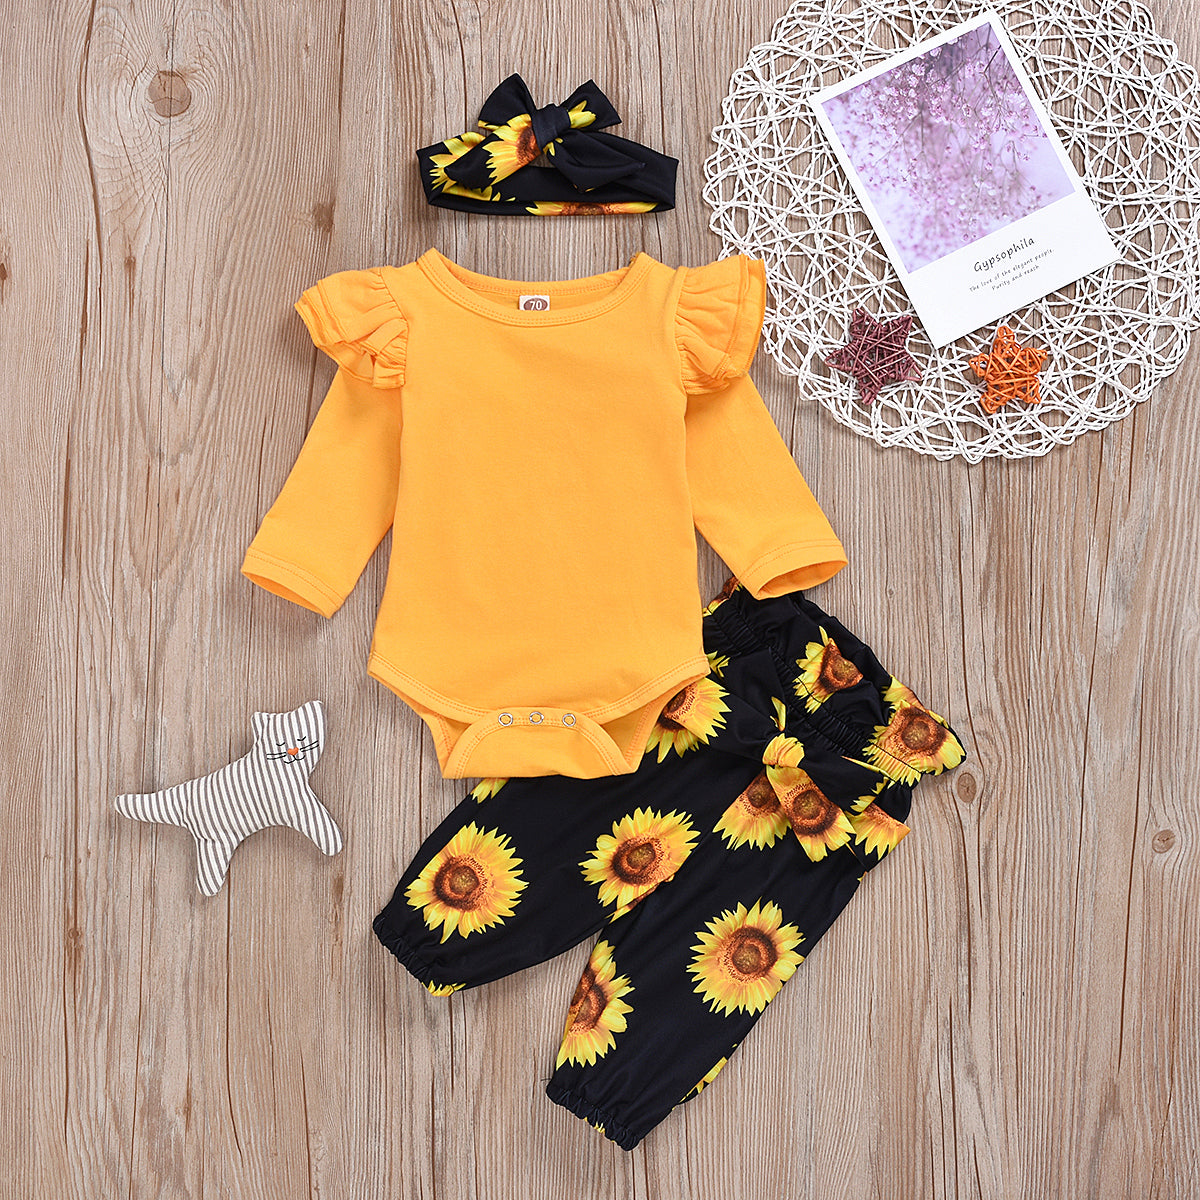 3-piece Baby / Toddler Sunflower Flutter-sleeve Bodysuit and Pants with Headband Set